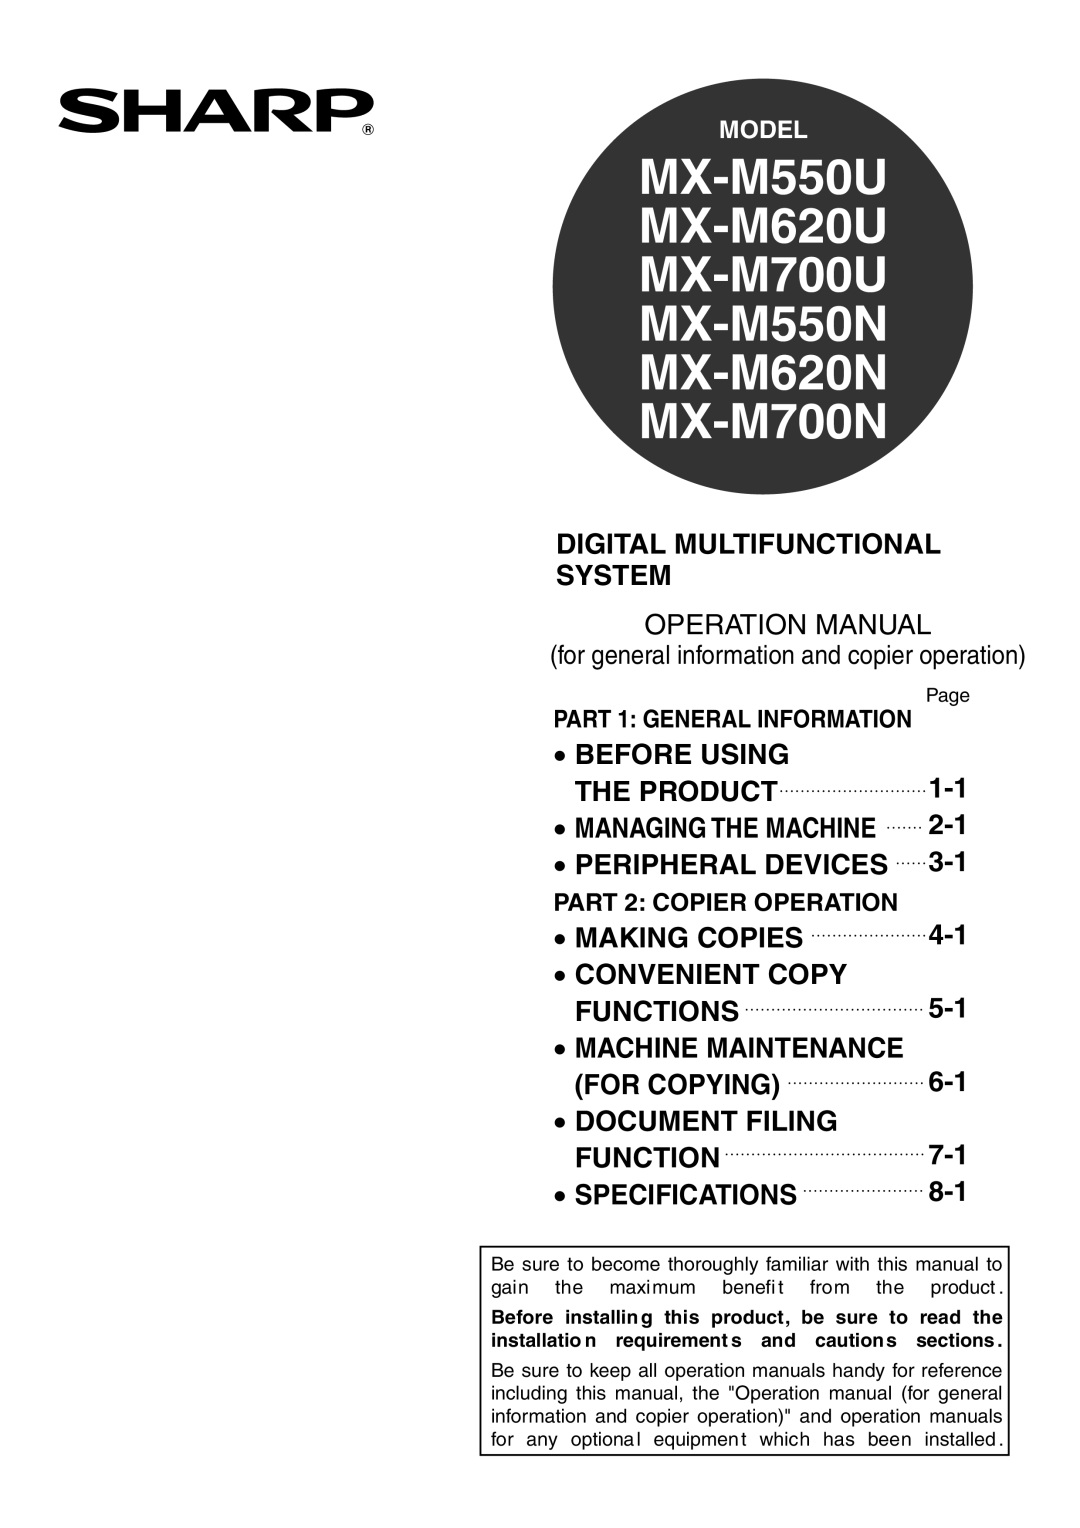 Sharp MX-M550U specifications Digital Multifunctional System, Before Using, The Product, Peripheral Devices, Making Copies 